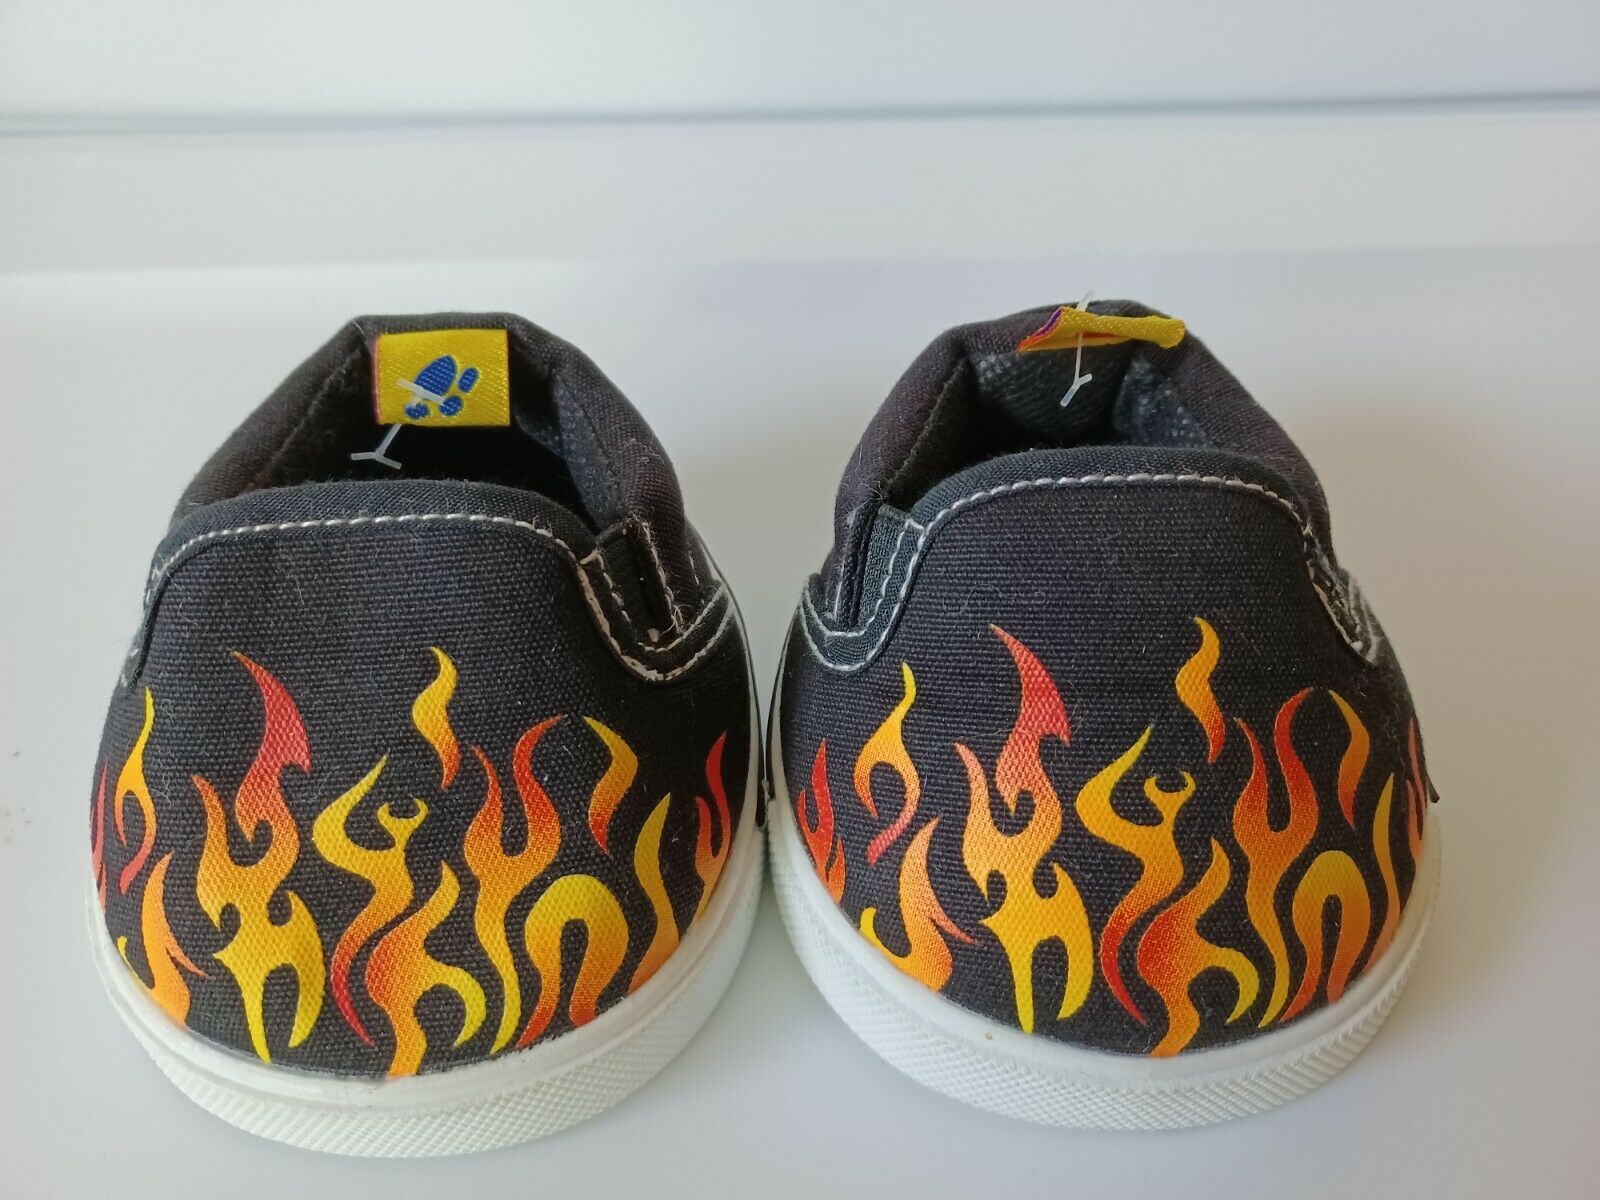 Build A Bear - Black Shoes With Flames On Front - Genuine Build-a-bear Accessory